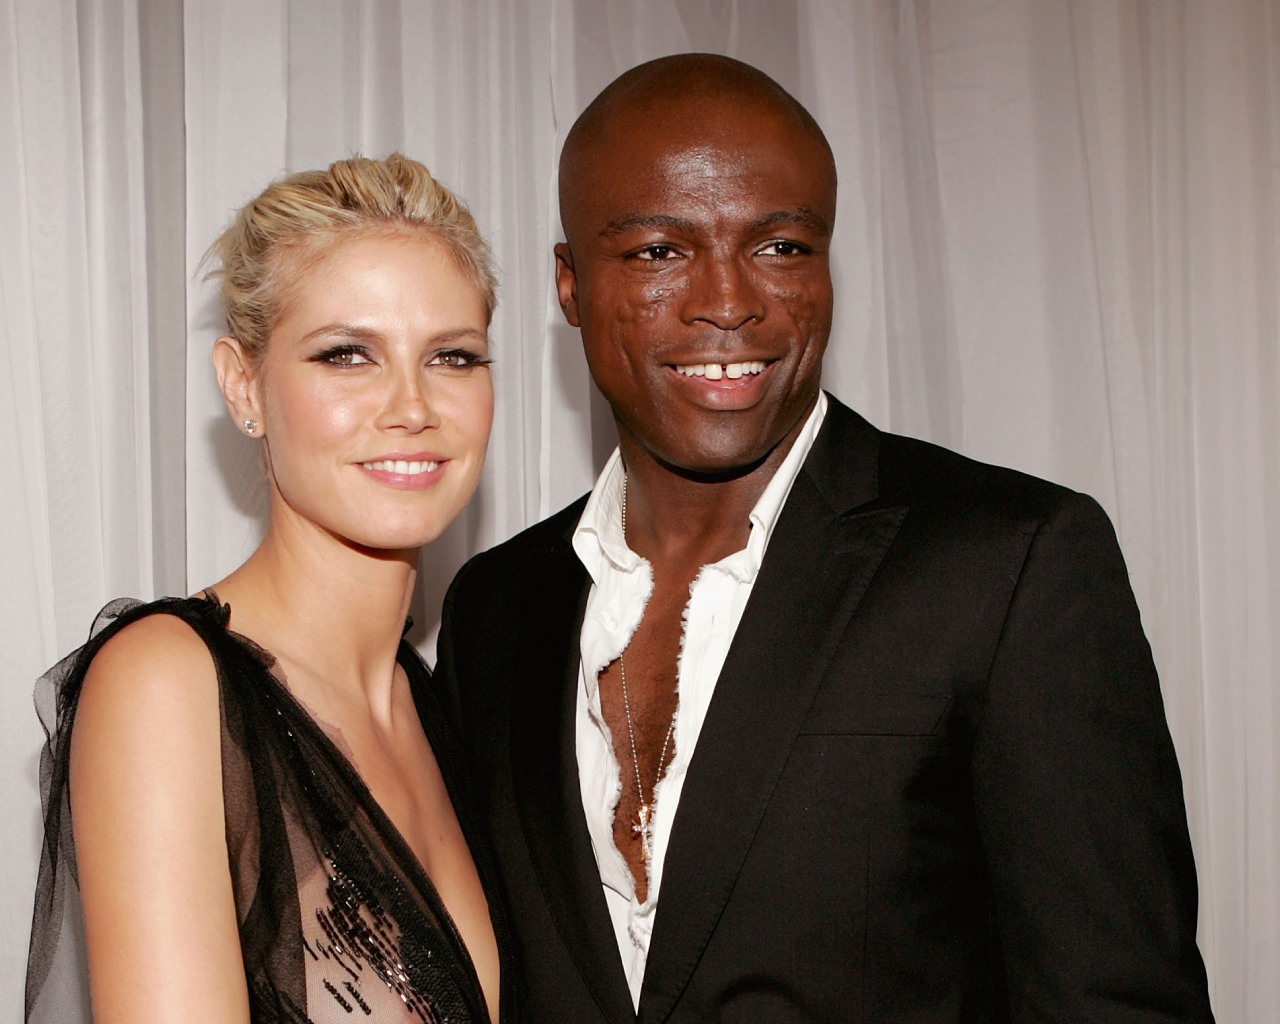 Seal Hints Relationship With ExWife Heidi Klum 'Is In Pieces'